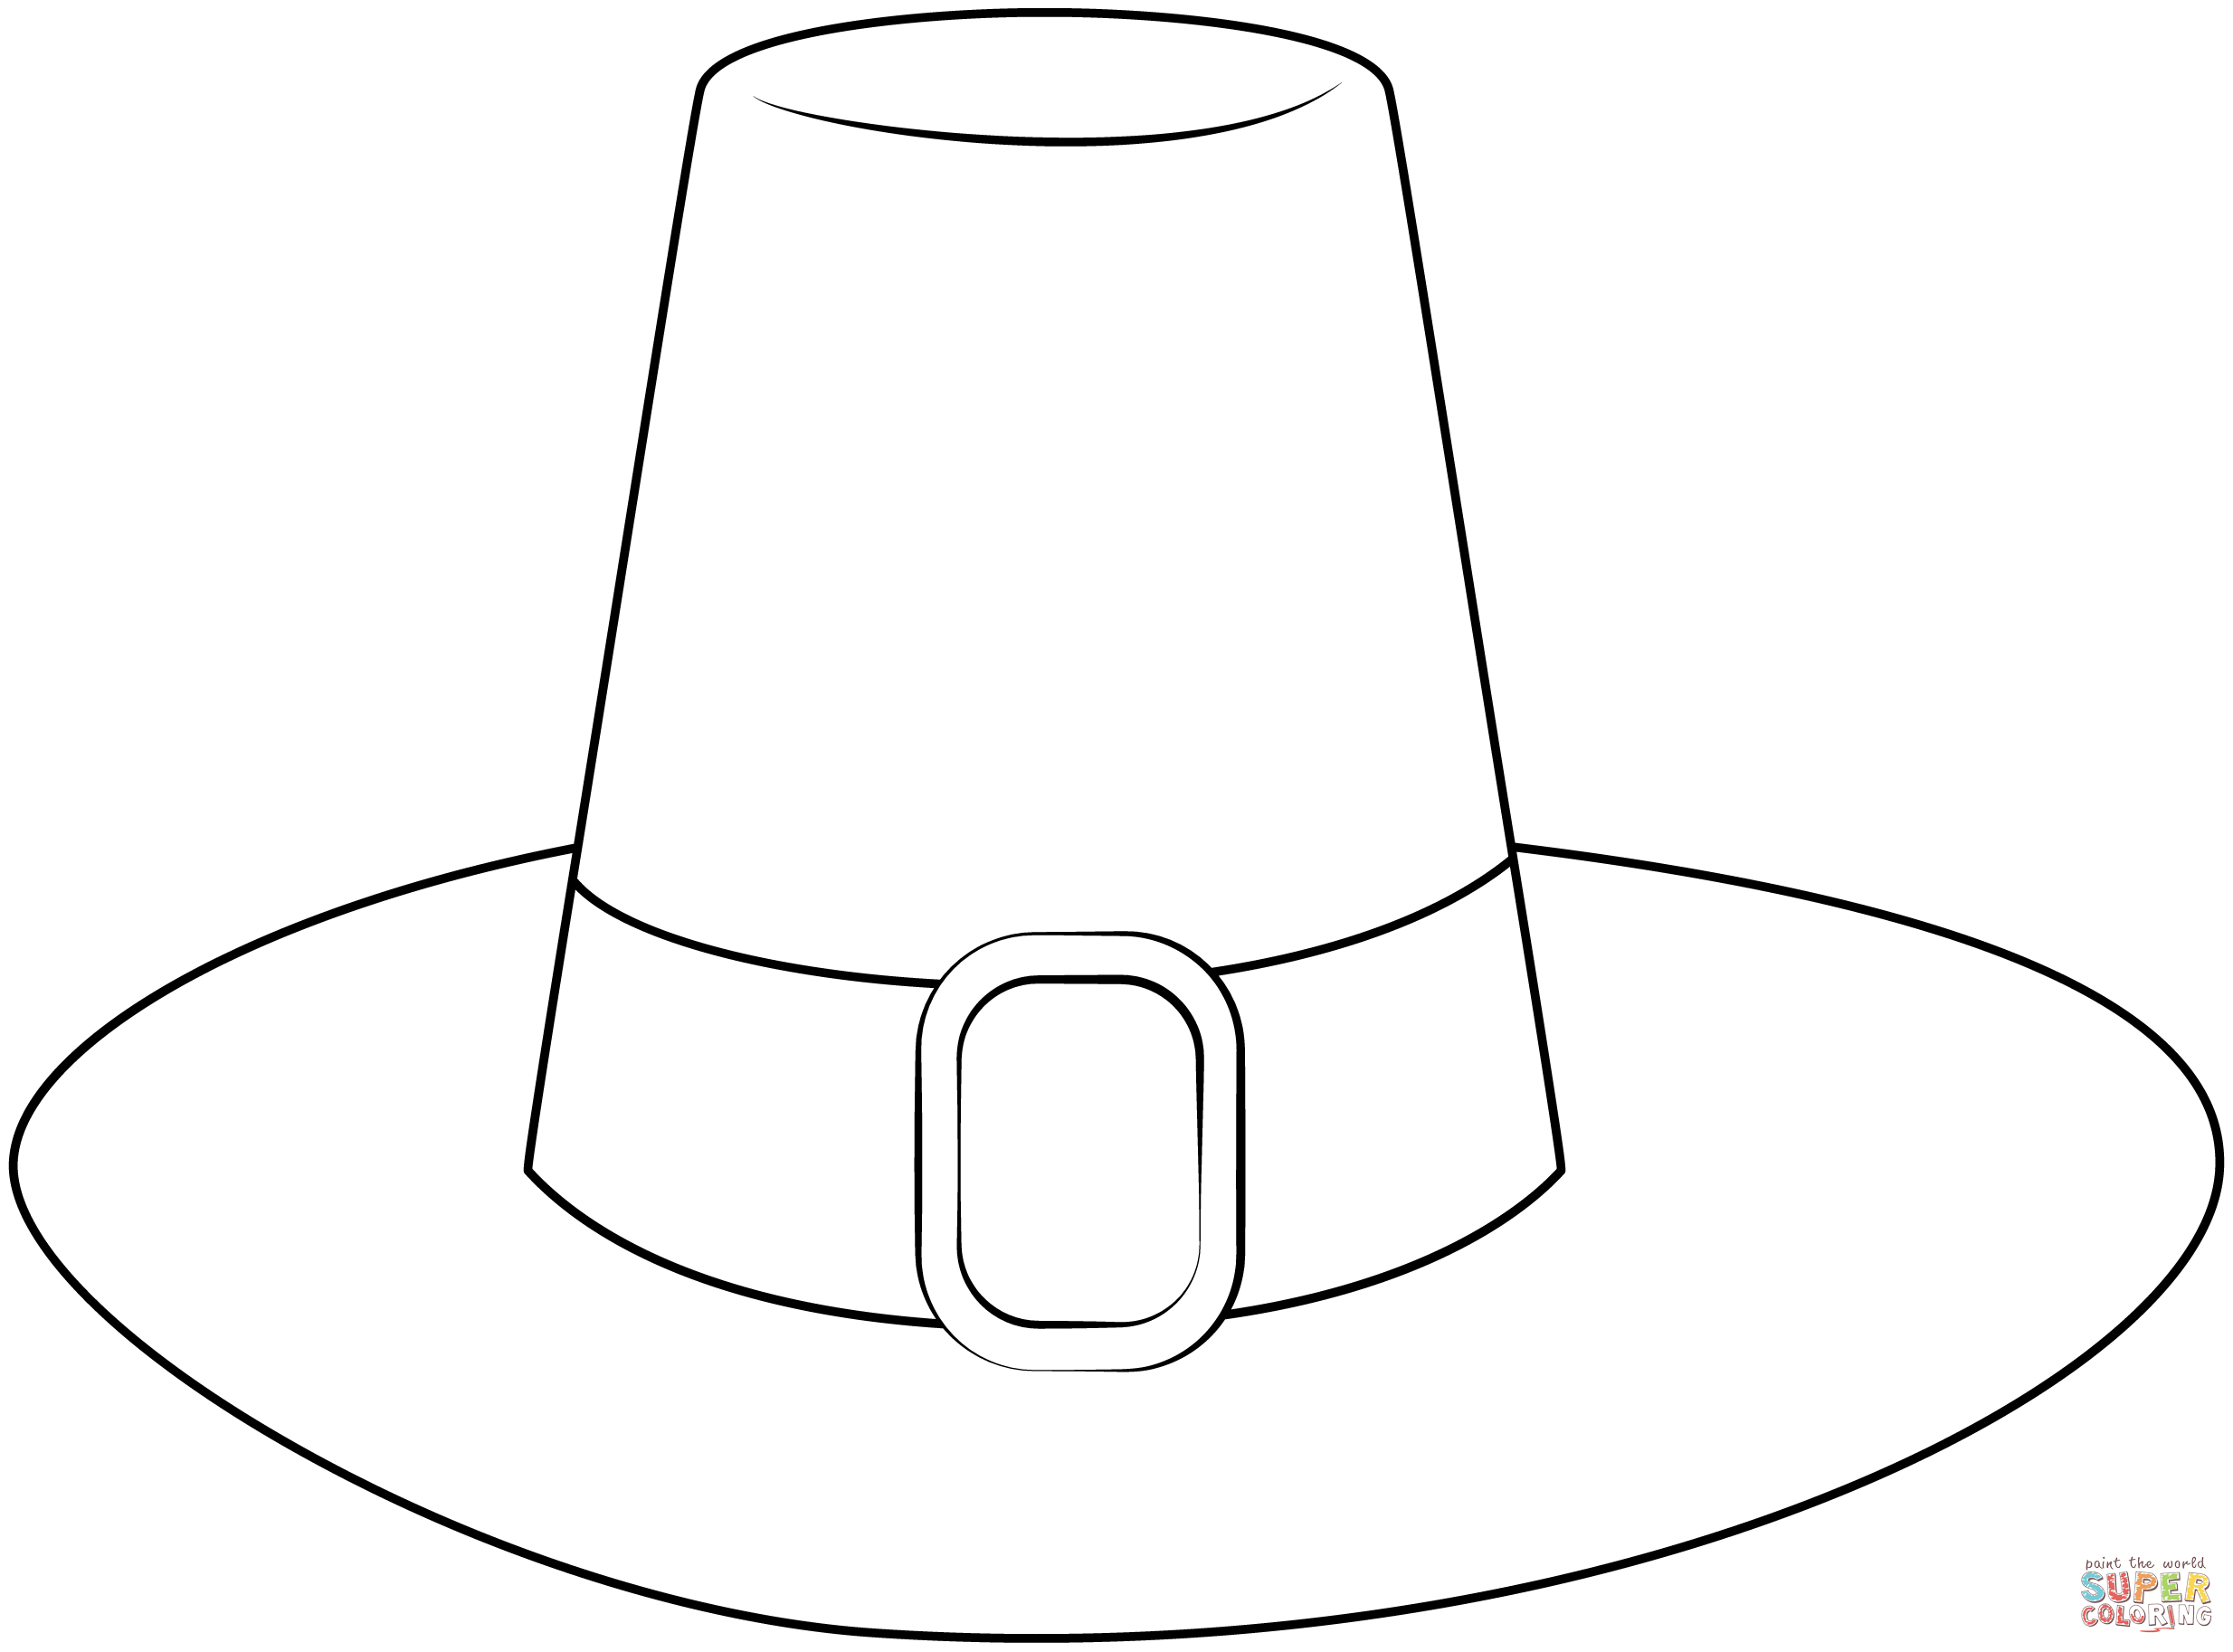 Pilgrim hat coloring page free printable coloring pages